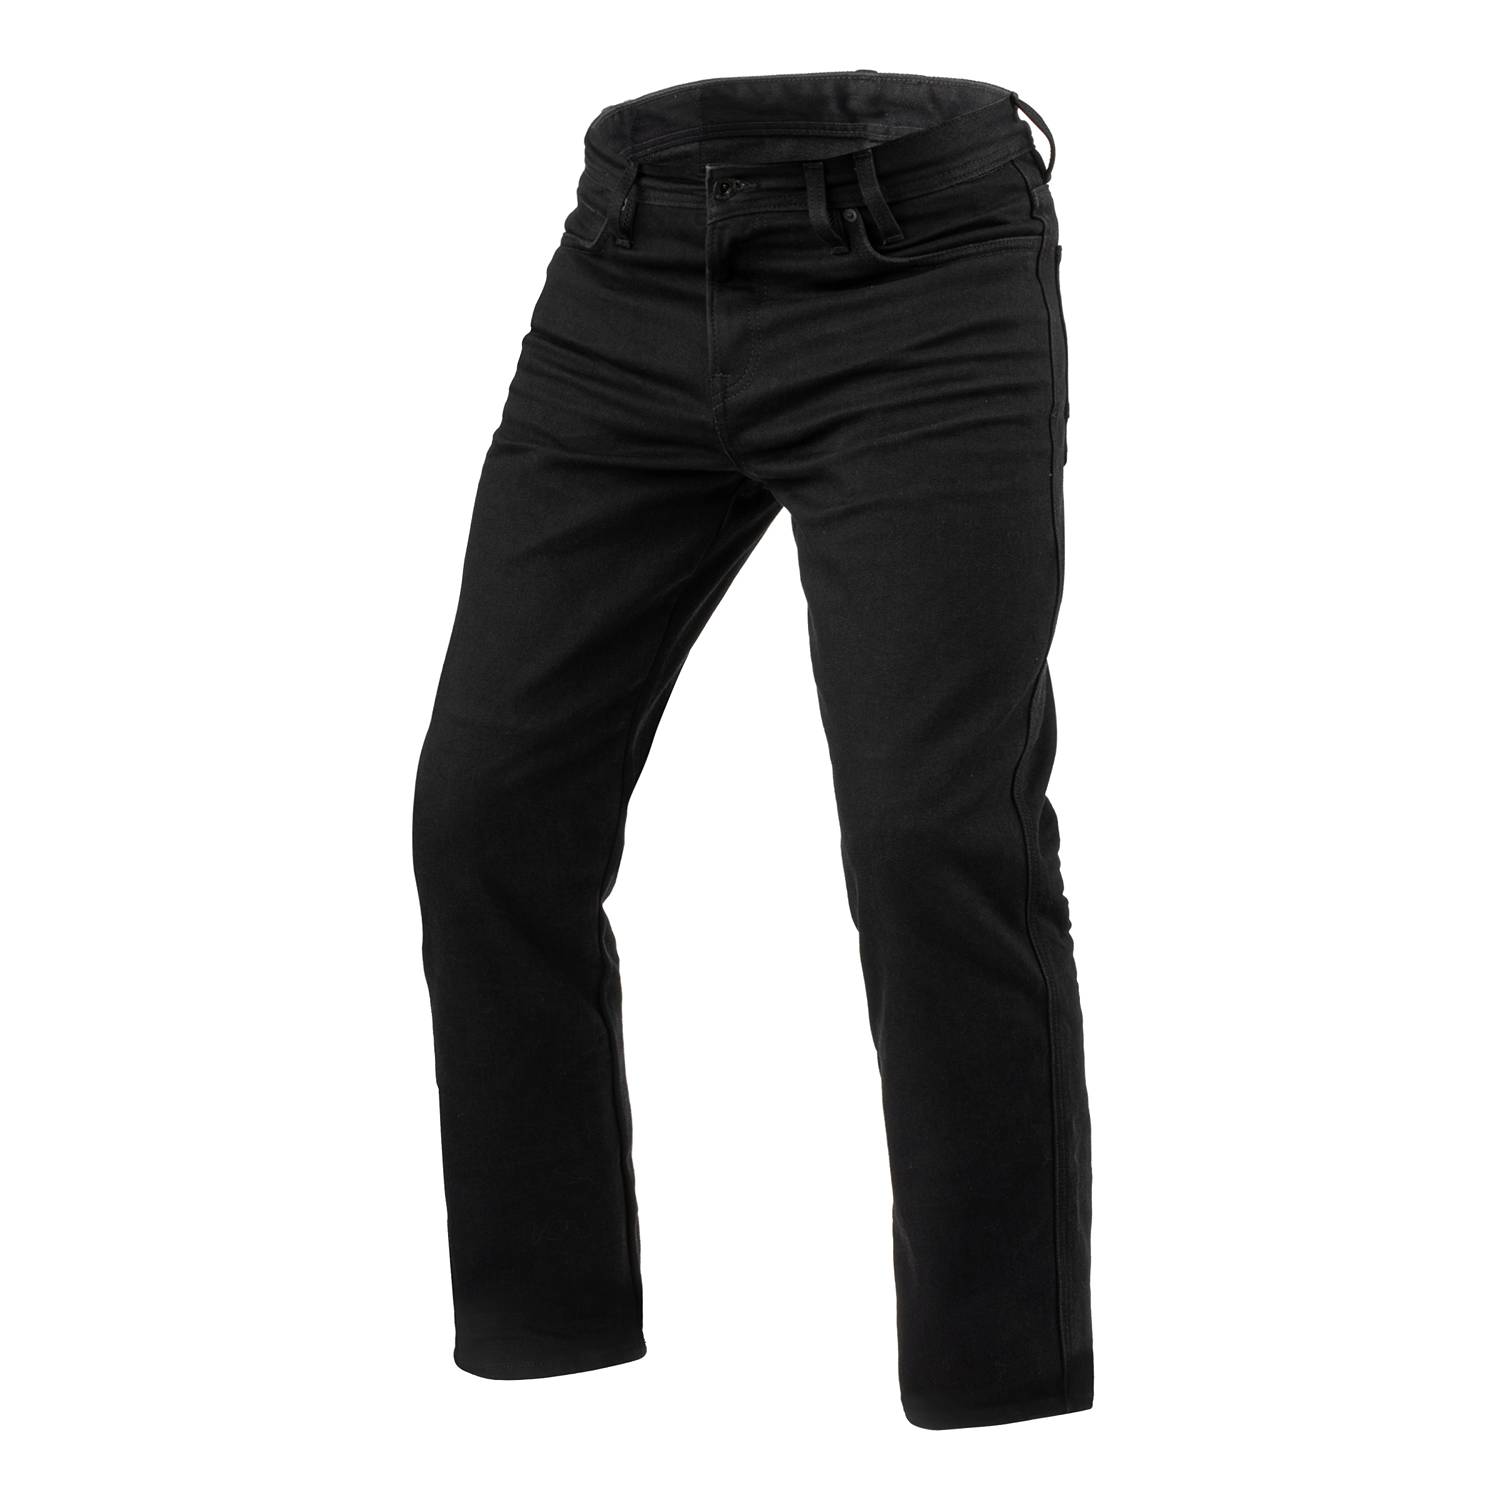 Image of REV'IT! Jeans Lombard 3 RF Black L36 Motorcycle Jeans Taille L36/W31